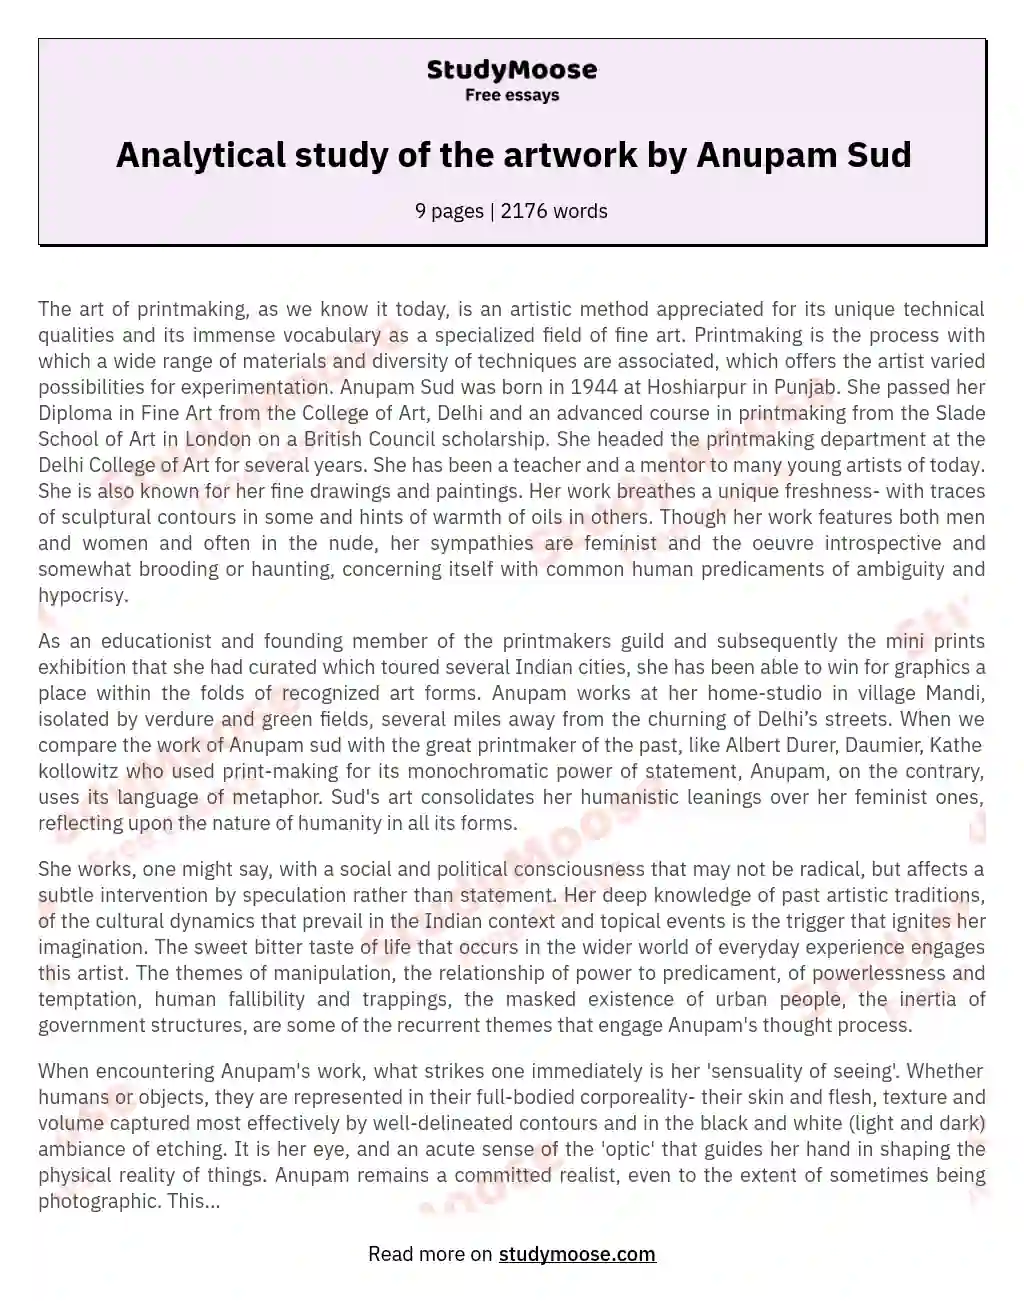 Analytical study of the artwork by Anupam Sud essay